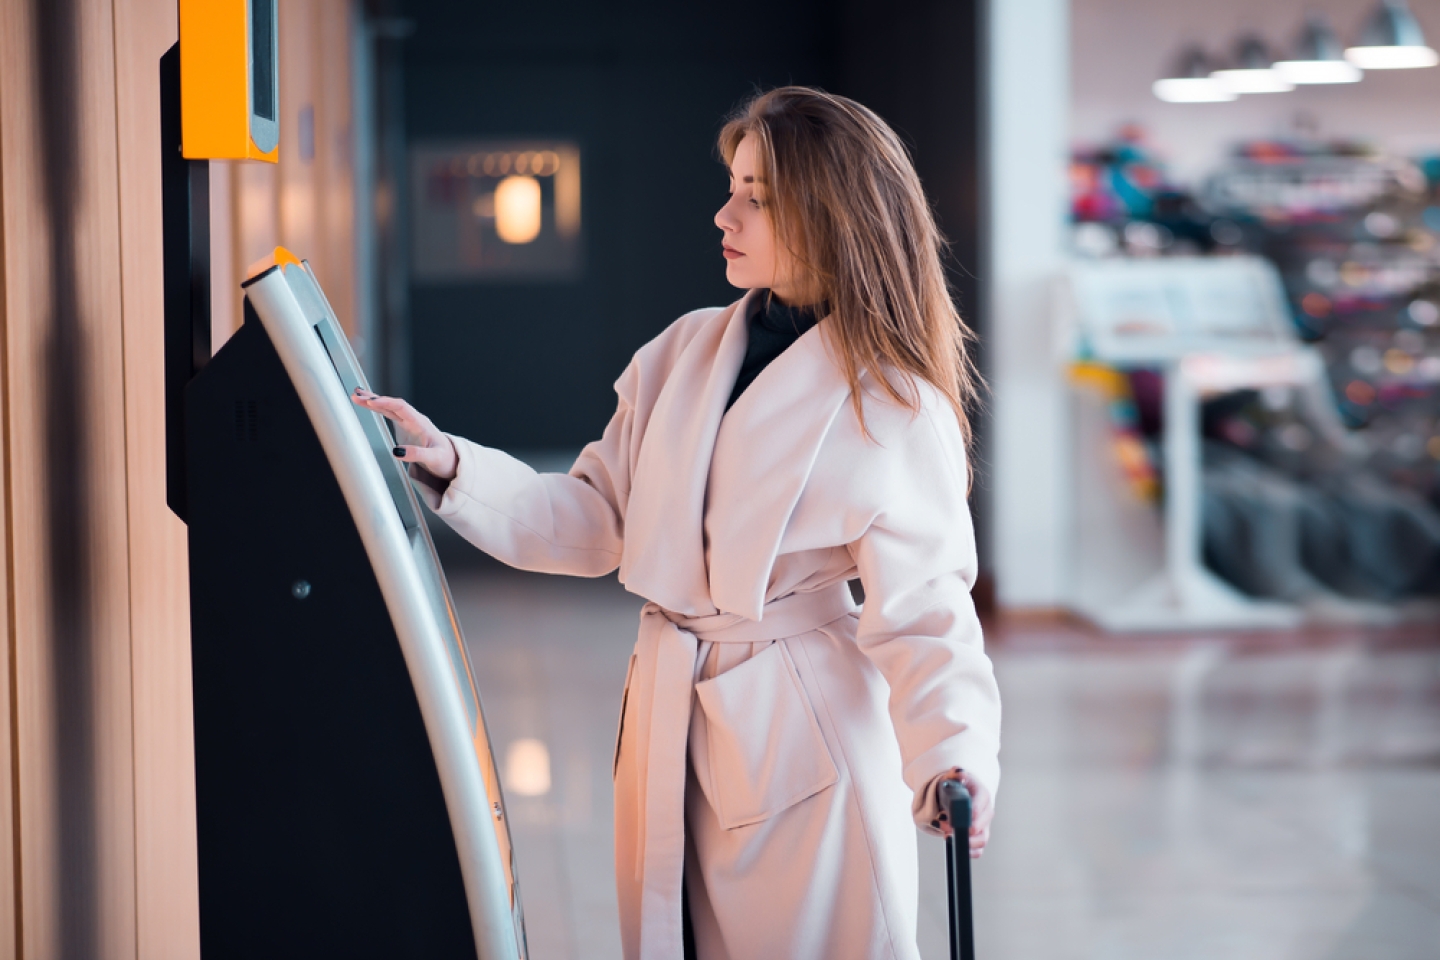 Young woman at self service transfer area.